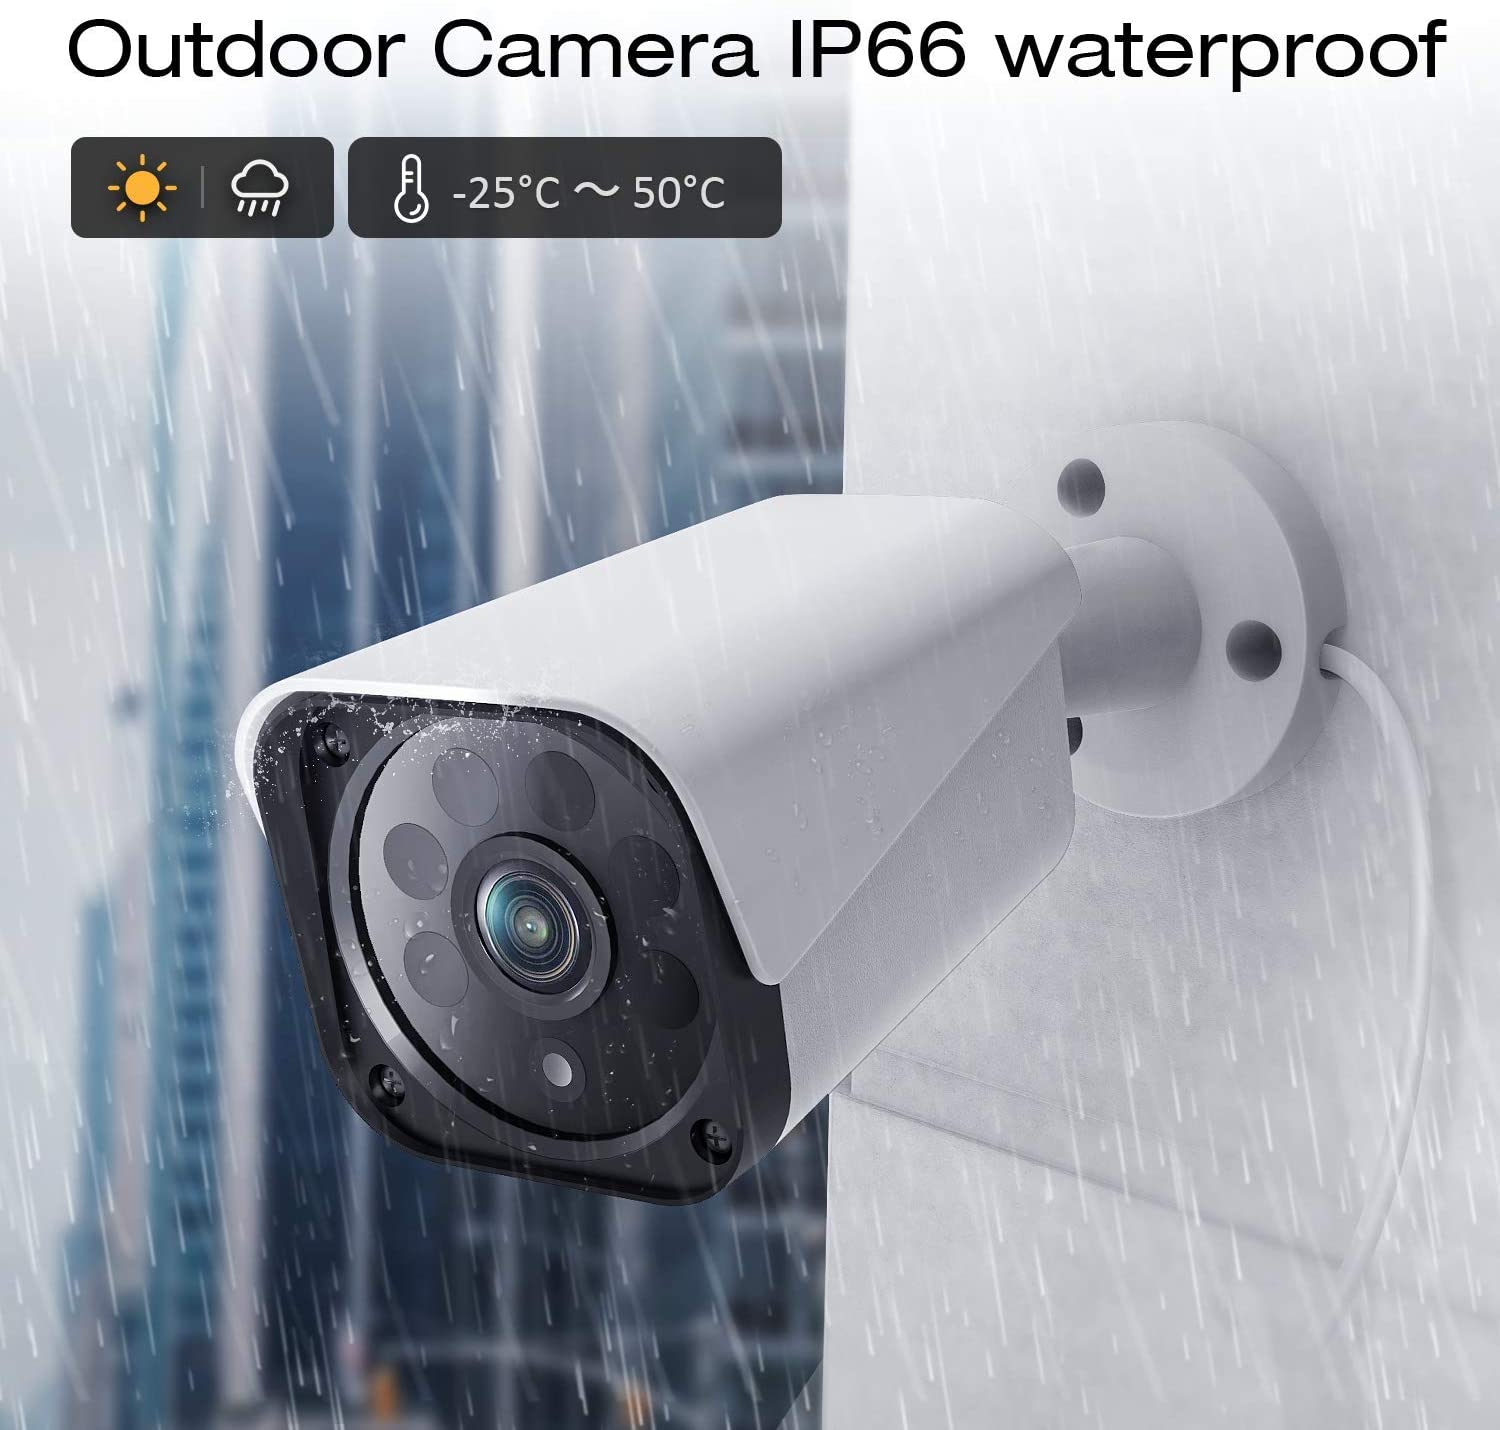 Toguard W208 8CH 1080P Outdoor Lite Wired DVR Security Surveillance Cameras With 3TB Hard Drive (Only Available In US)